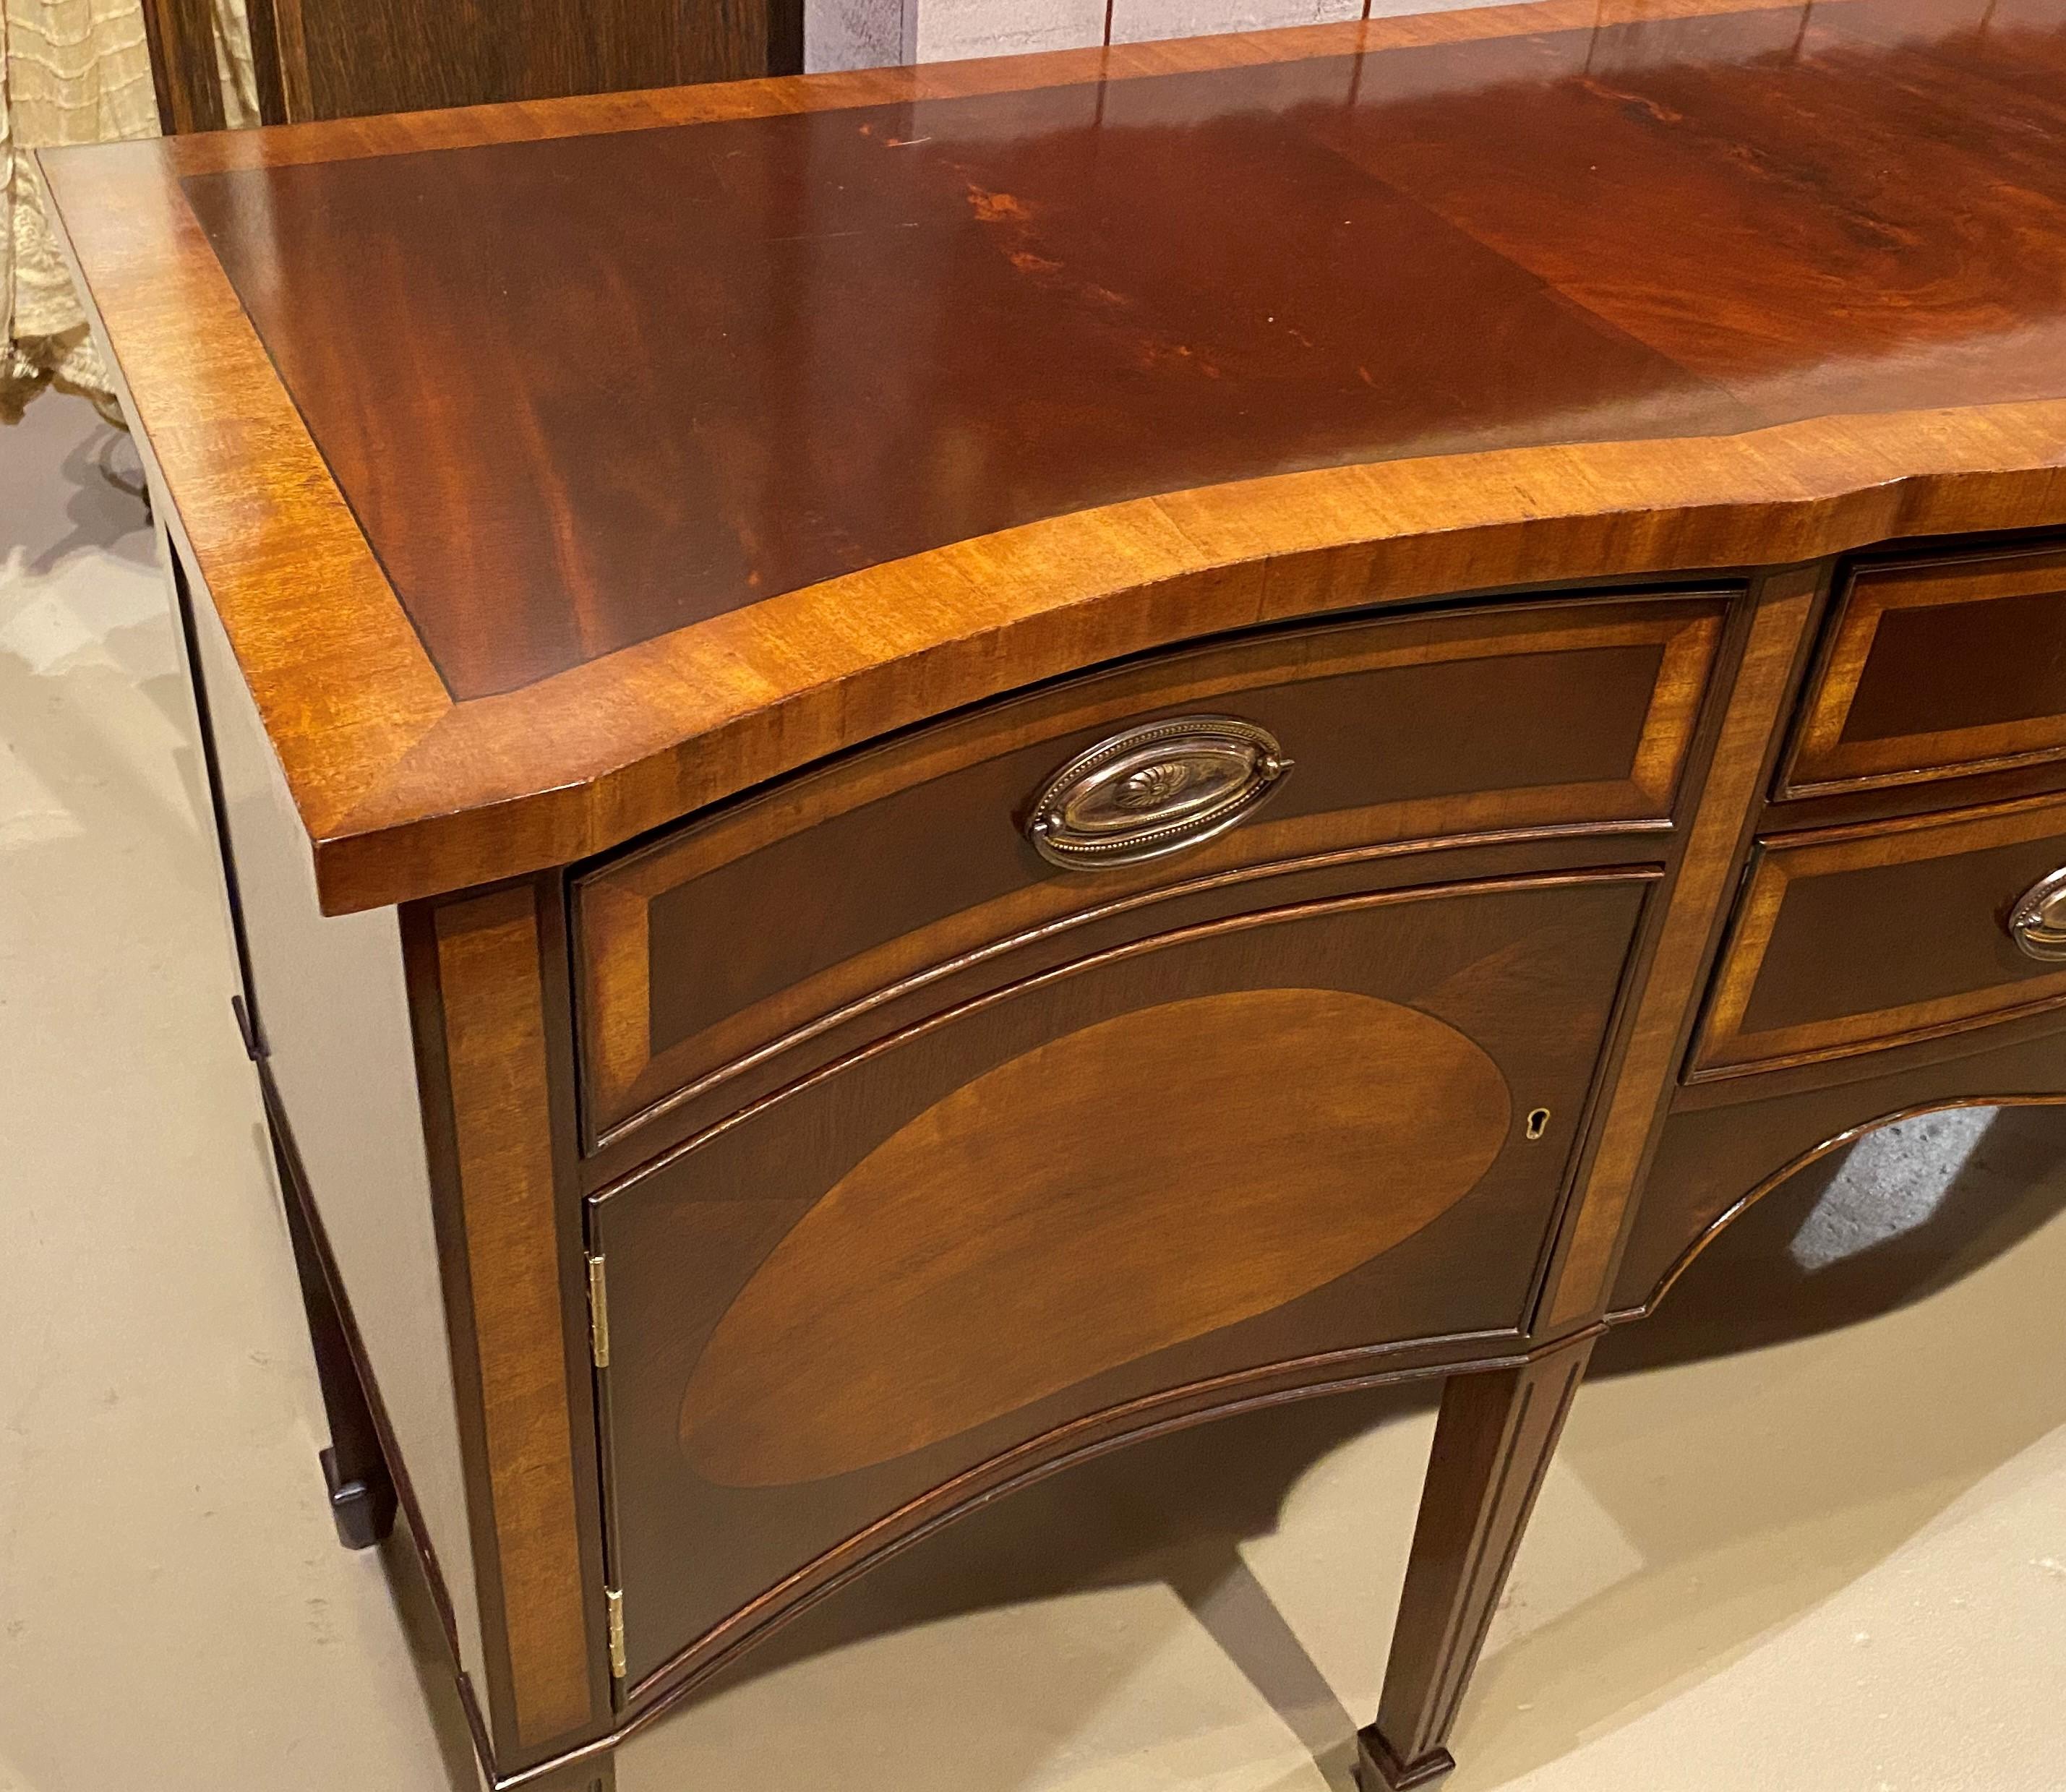 A fine Sussex Georgian style sideboard in mahogany and inlaid yew wood with shaped banded top surmounting a conforming case with felted divided flatware drawer over a matching long drawer with oval brasses and crossbanding, flanked by fitted top